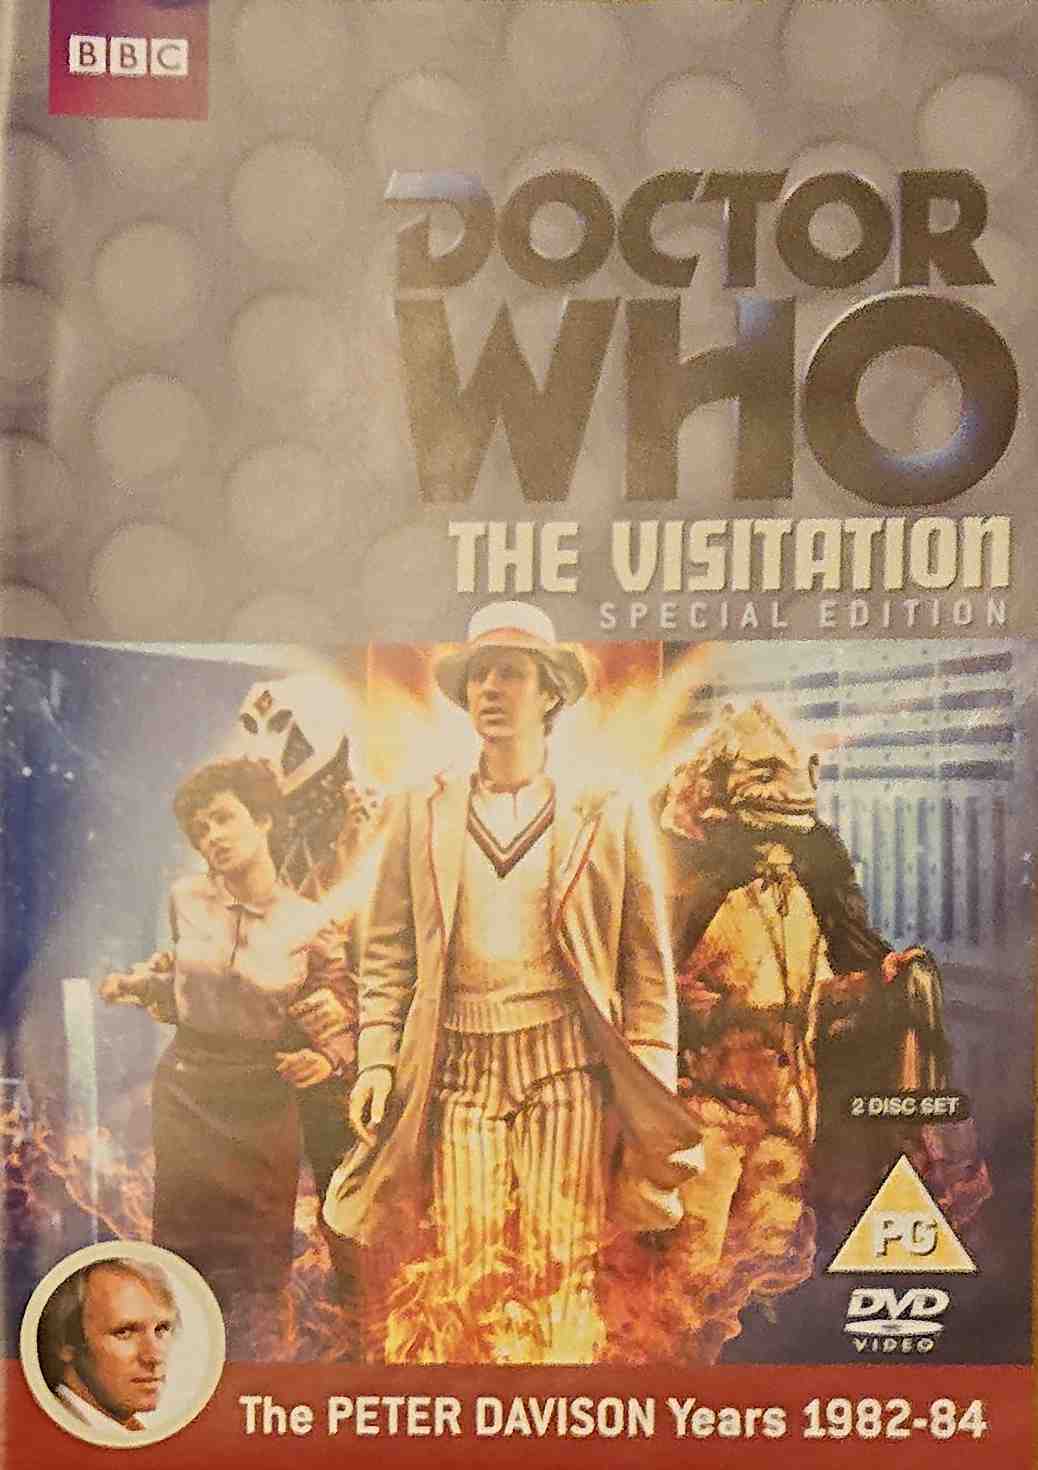 Picture of BBCDVD 3690 Doctor Who - The visitation by artist Eric Saward from the BBC records and Tapes library